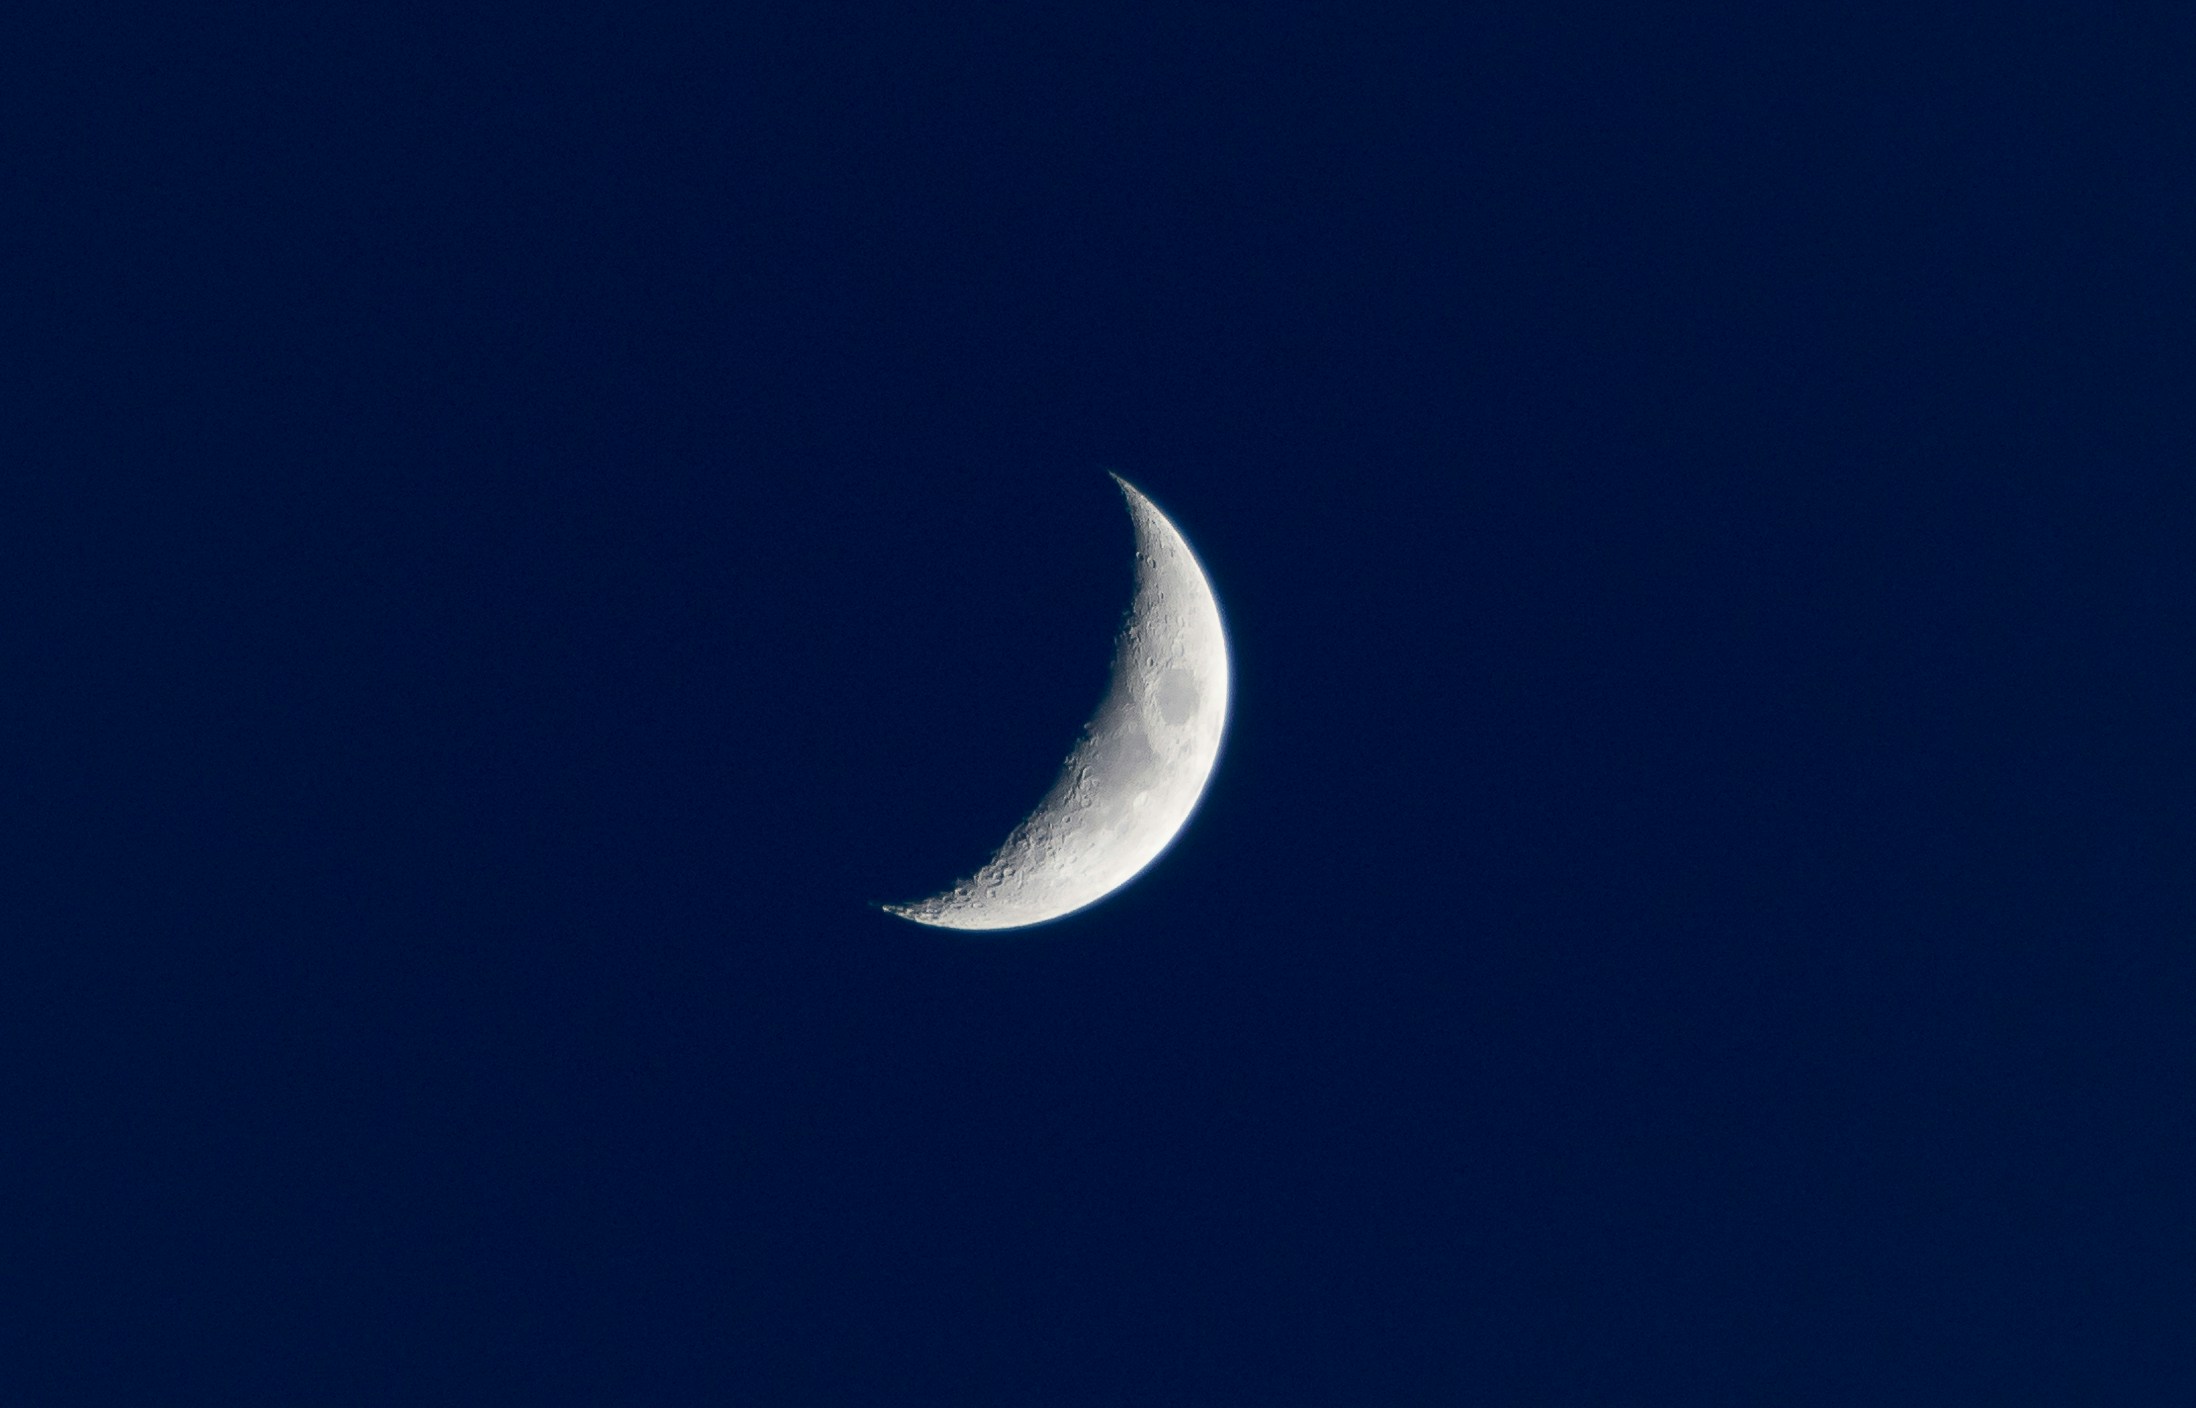 the crescent of the moon shines in the evening sky